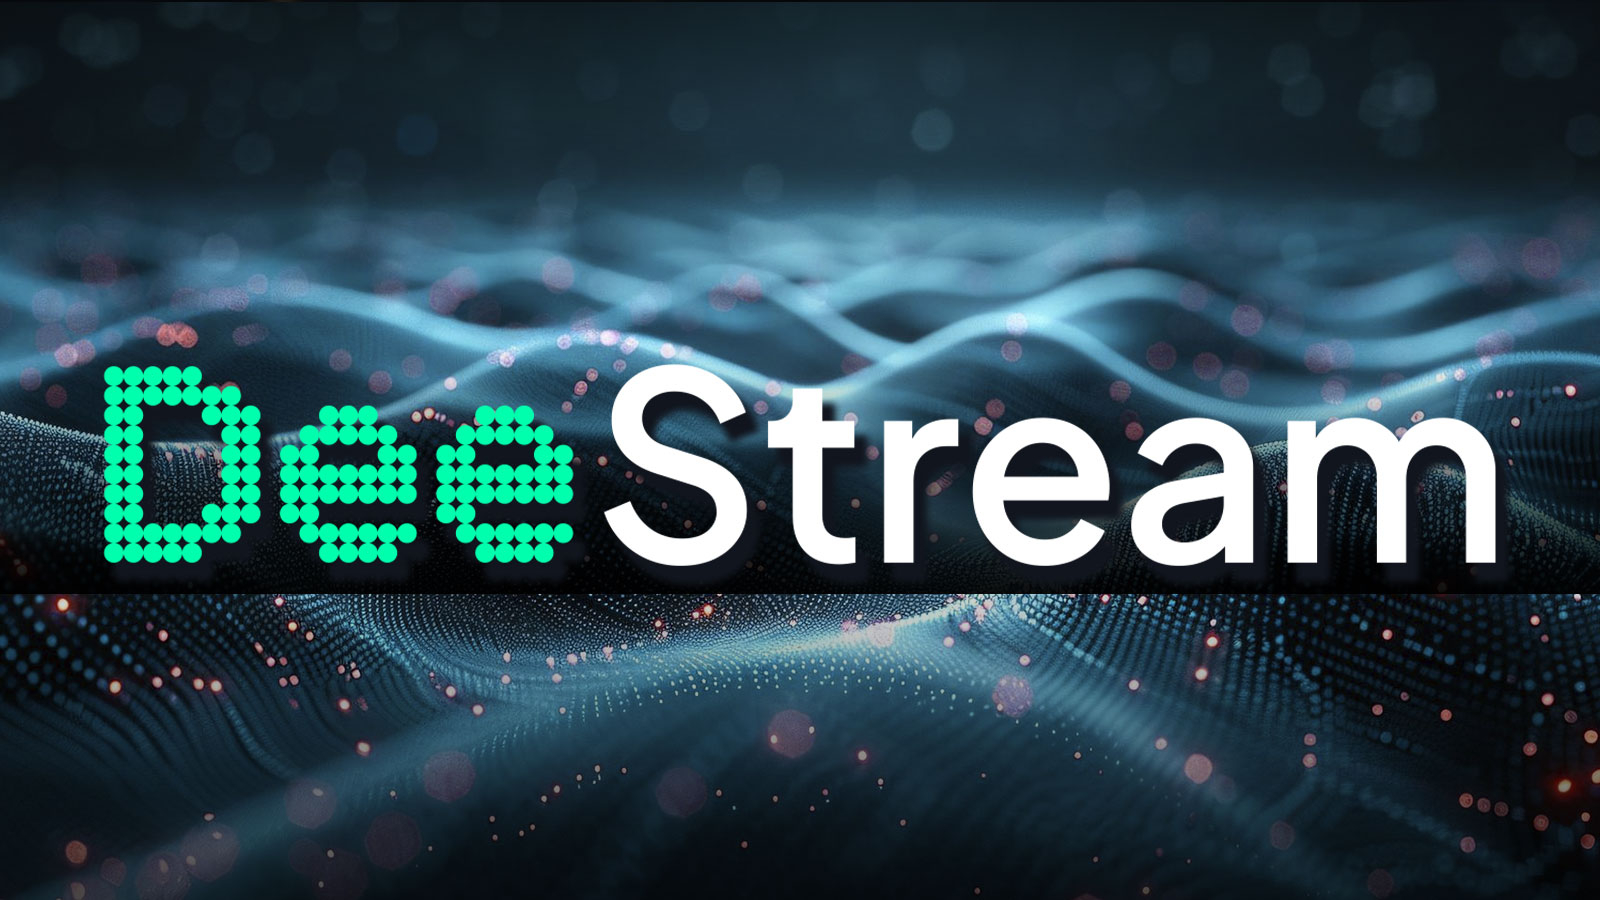 DeeStream (DST) Asset Preliminary Sale Spotlighted by Altcoiners in April as XRP, Solana (SOL) Majors On Bullish Stream